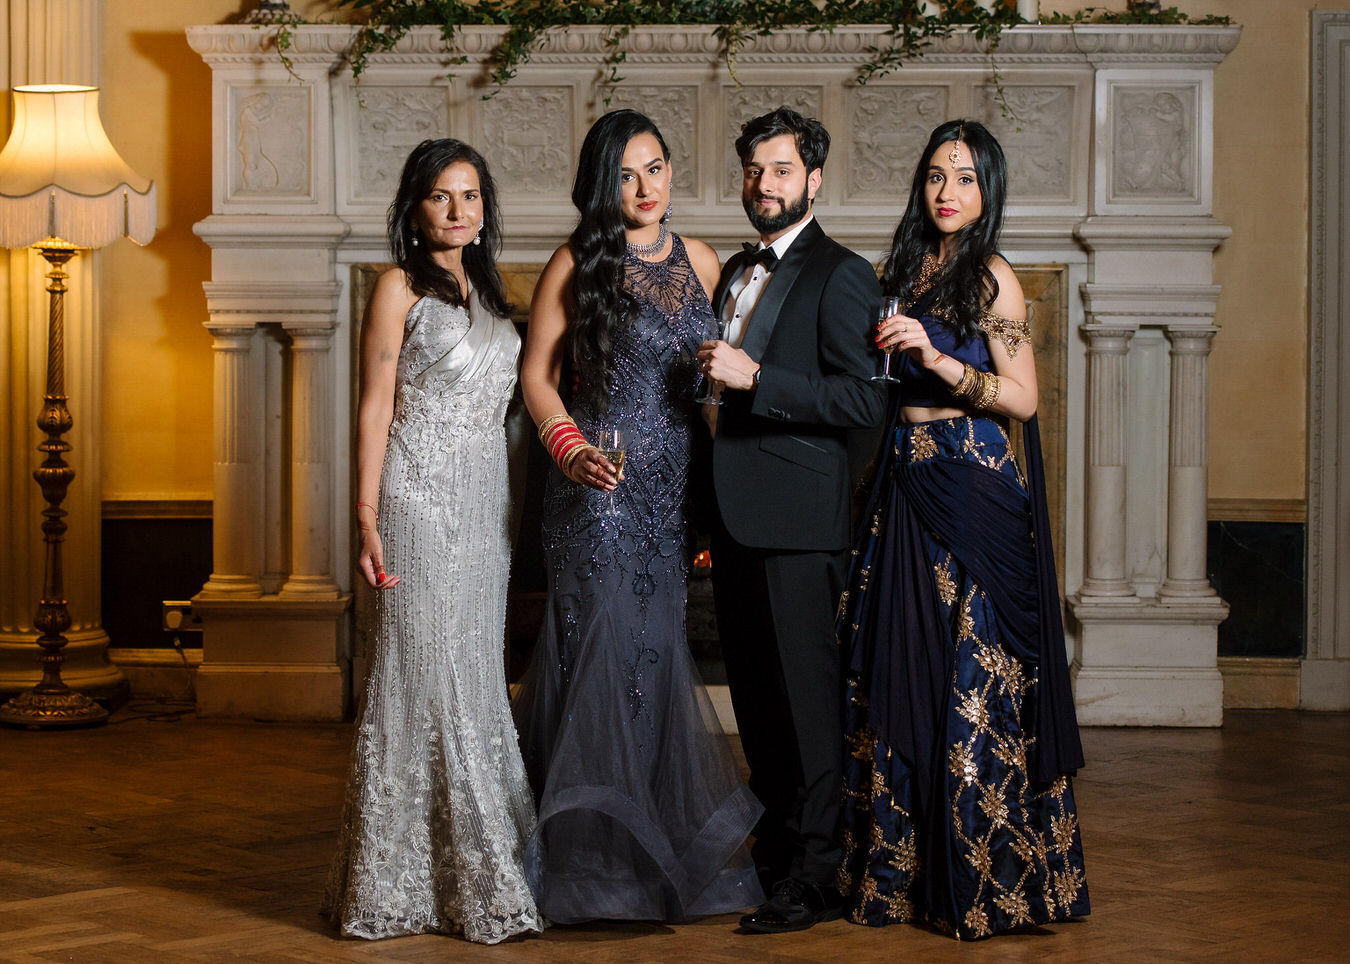 Sikh Asian wedding family photography portrait with mother of the bride dressed in sparkling grey evening dress and sister’s bride on the right

